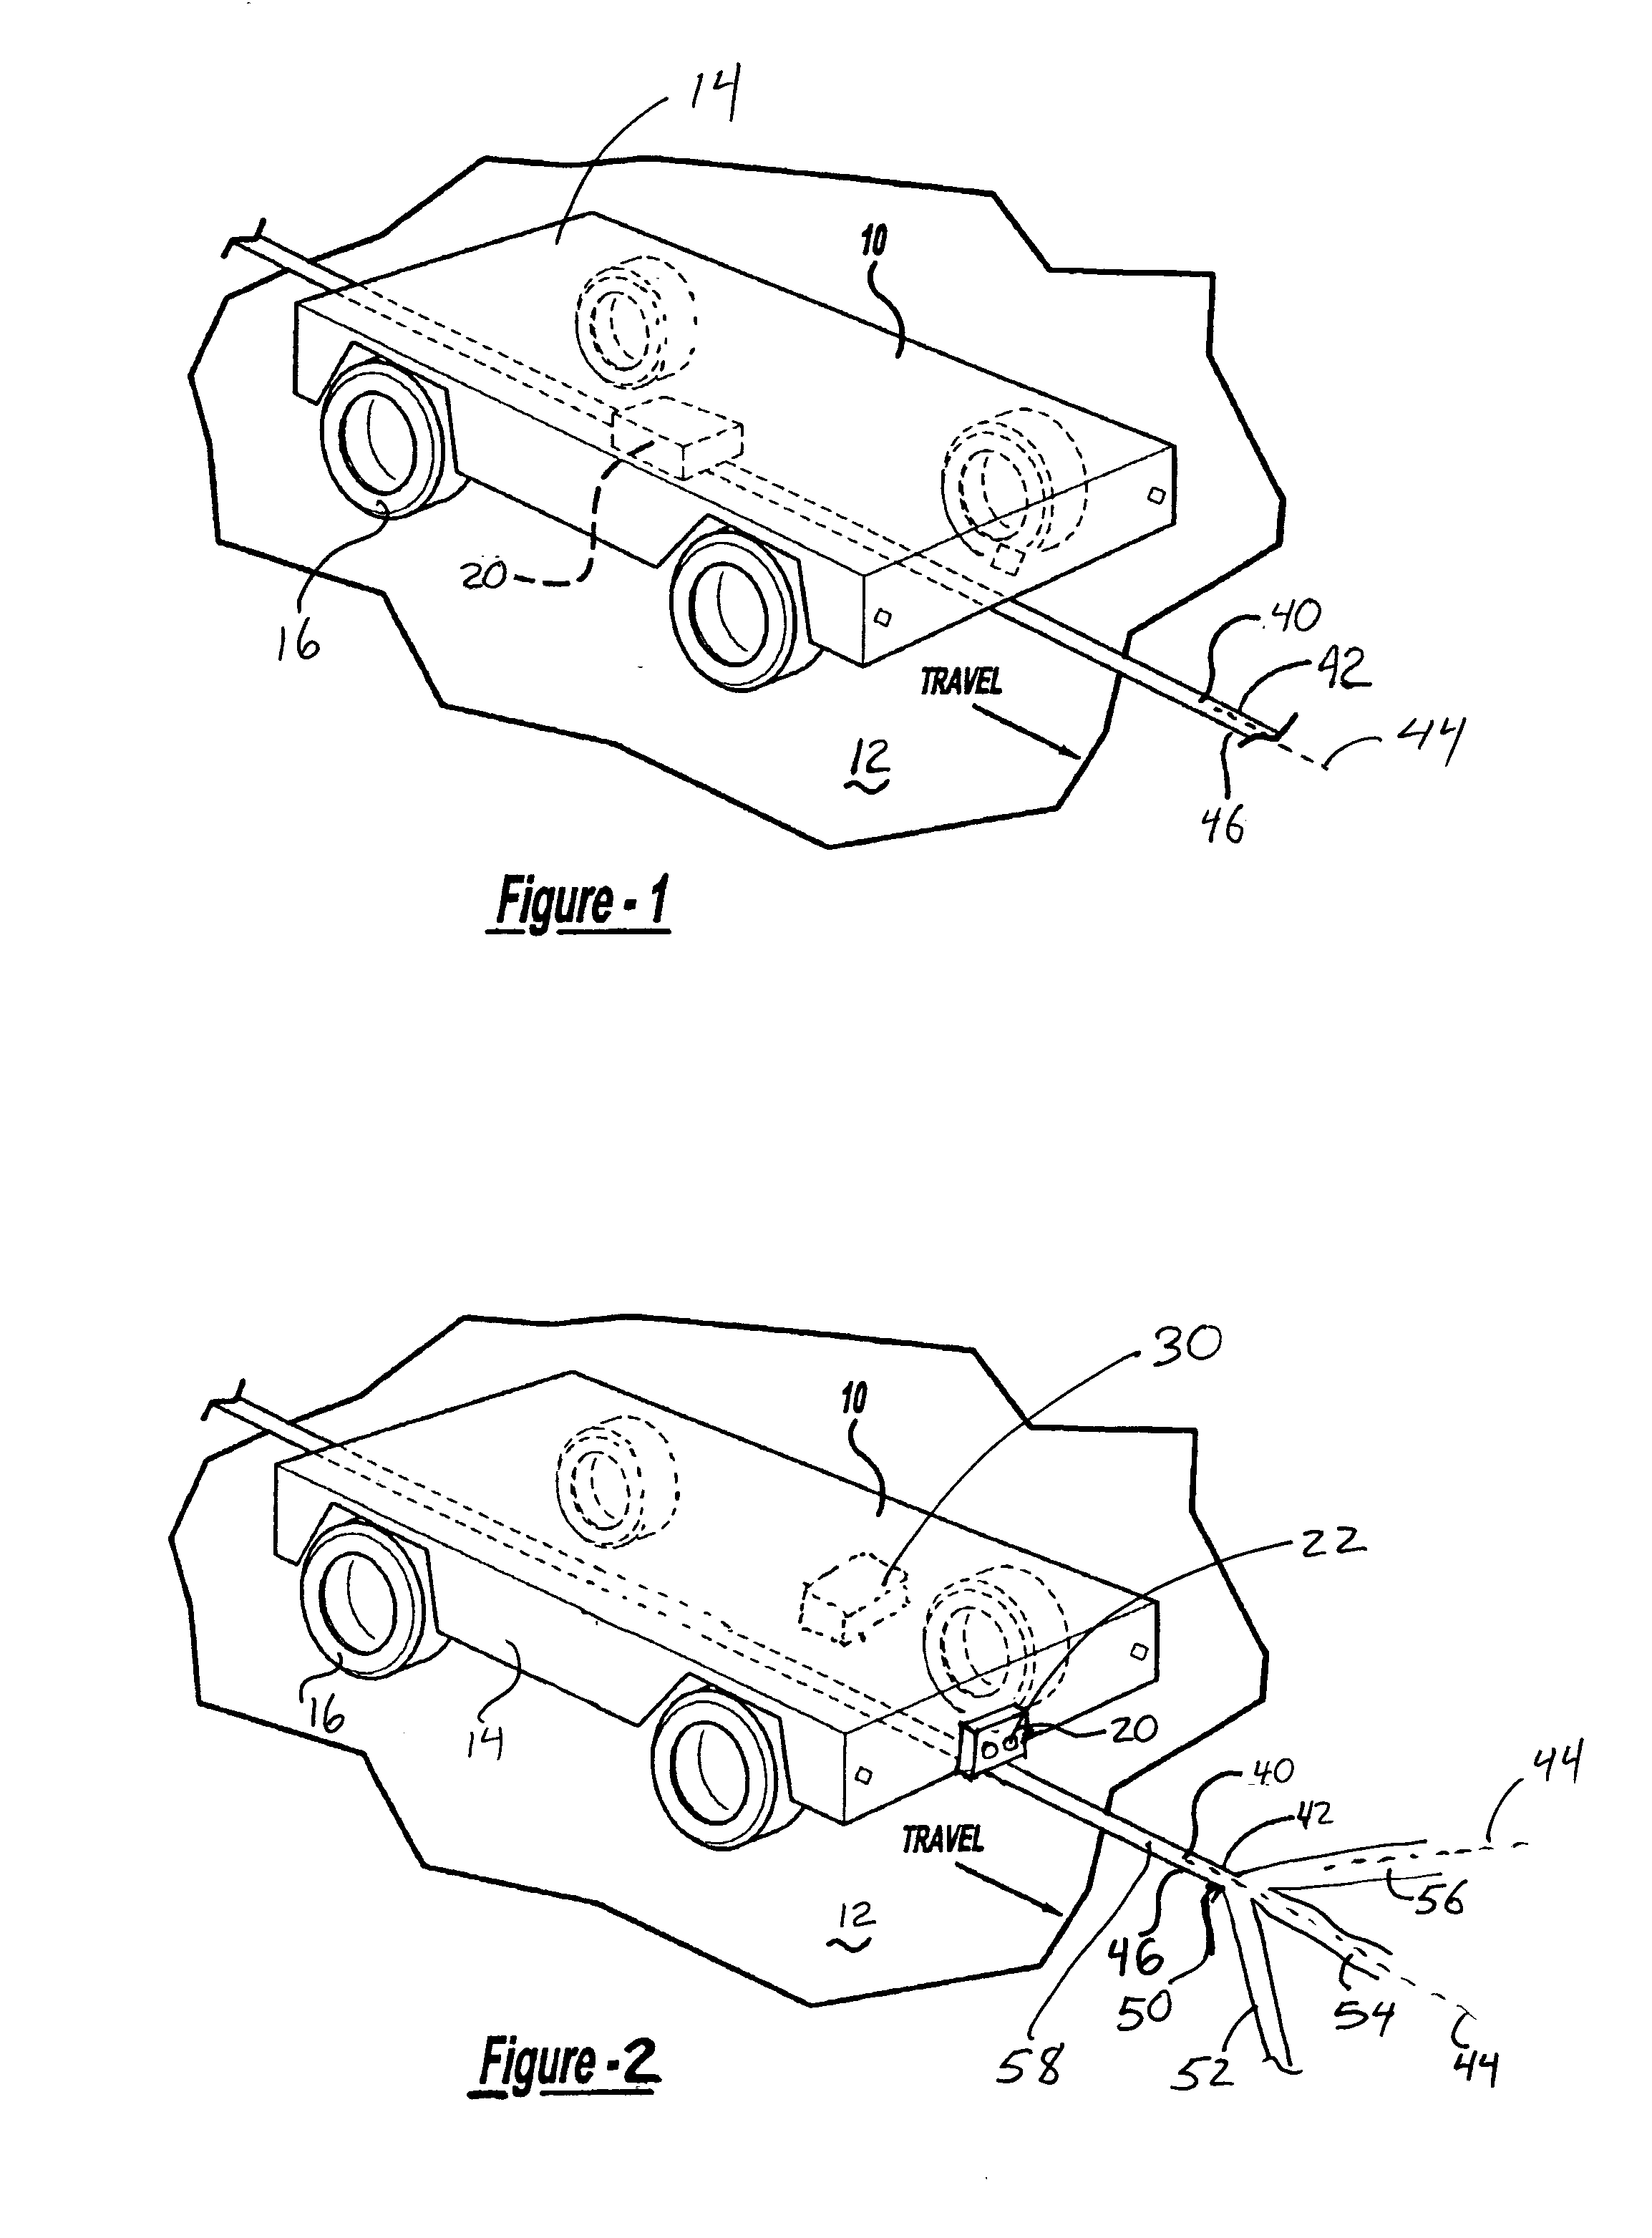 Automatic guided vehicle system and method